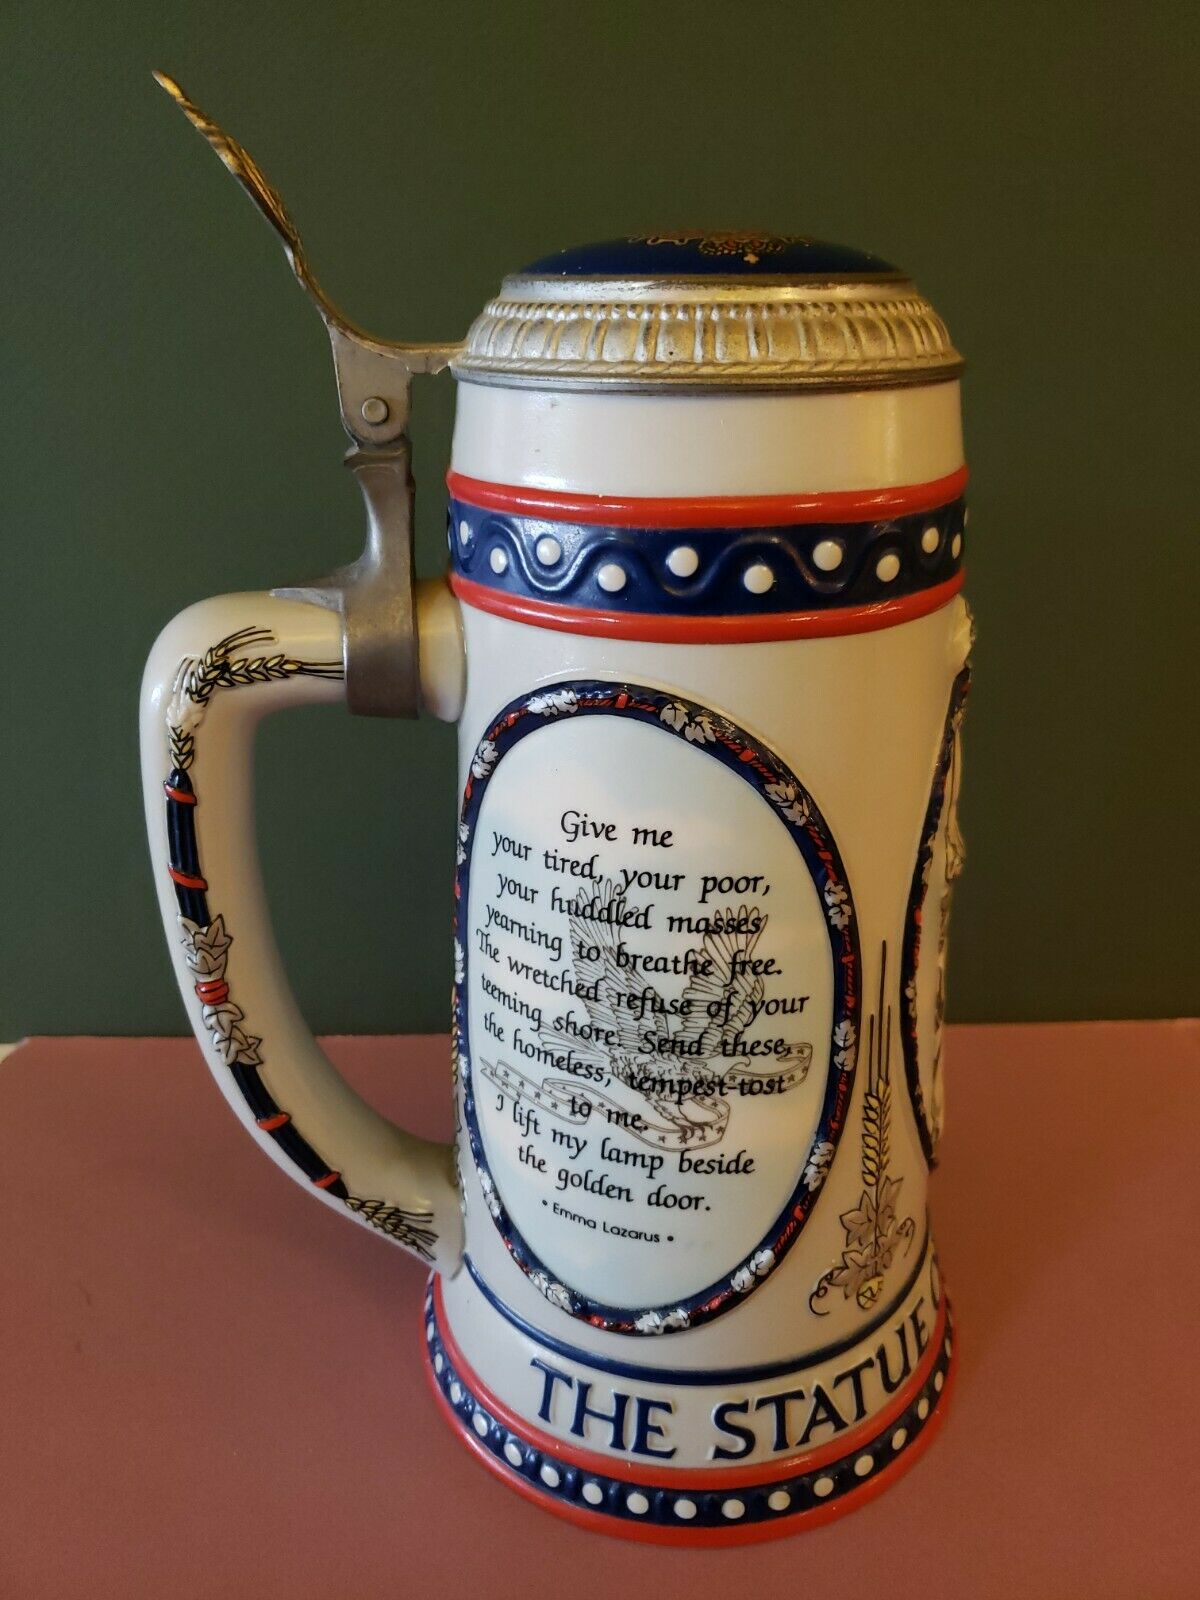 Stroh Brewery Ltd Edition #05918 Statue Of Liberty Beer Stein1986